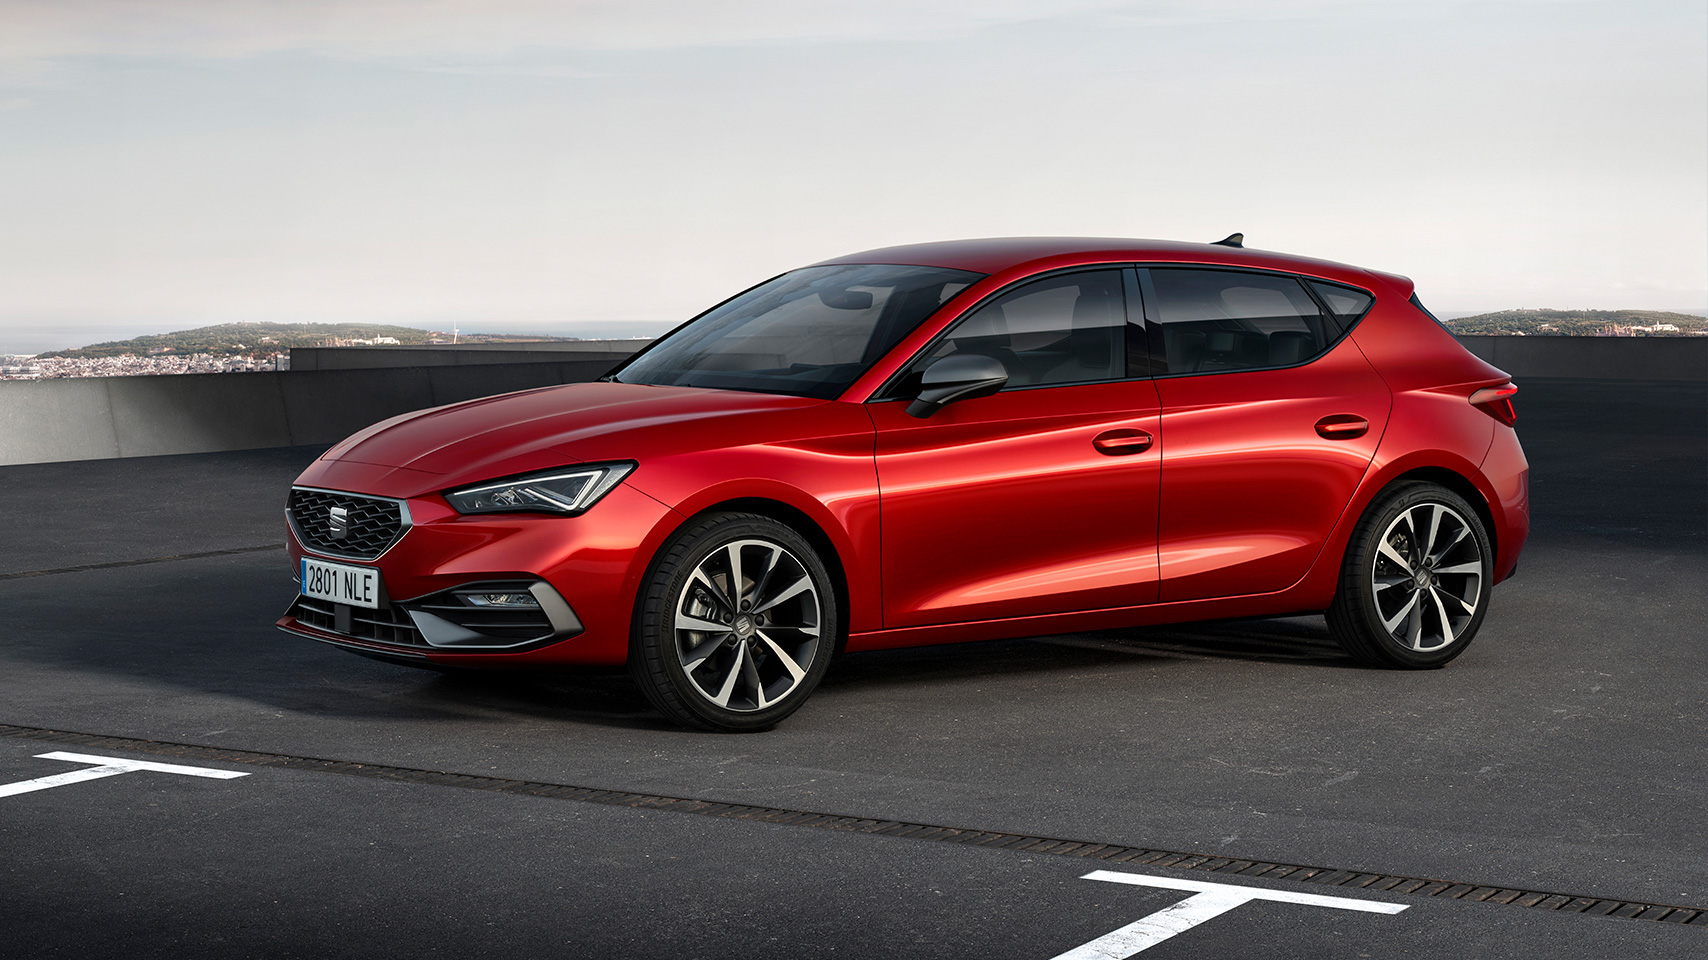 World Premiere of the all-new SEAT Leon